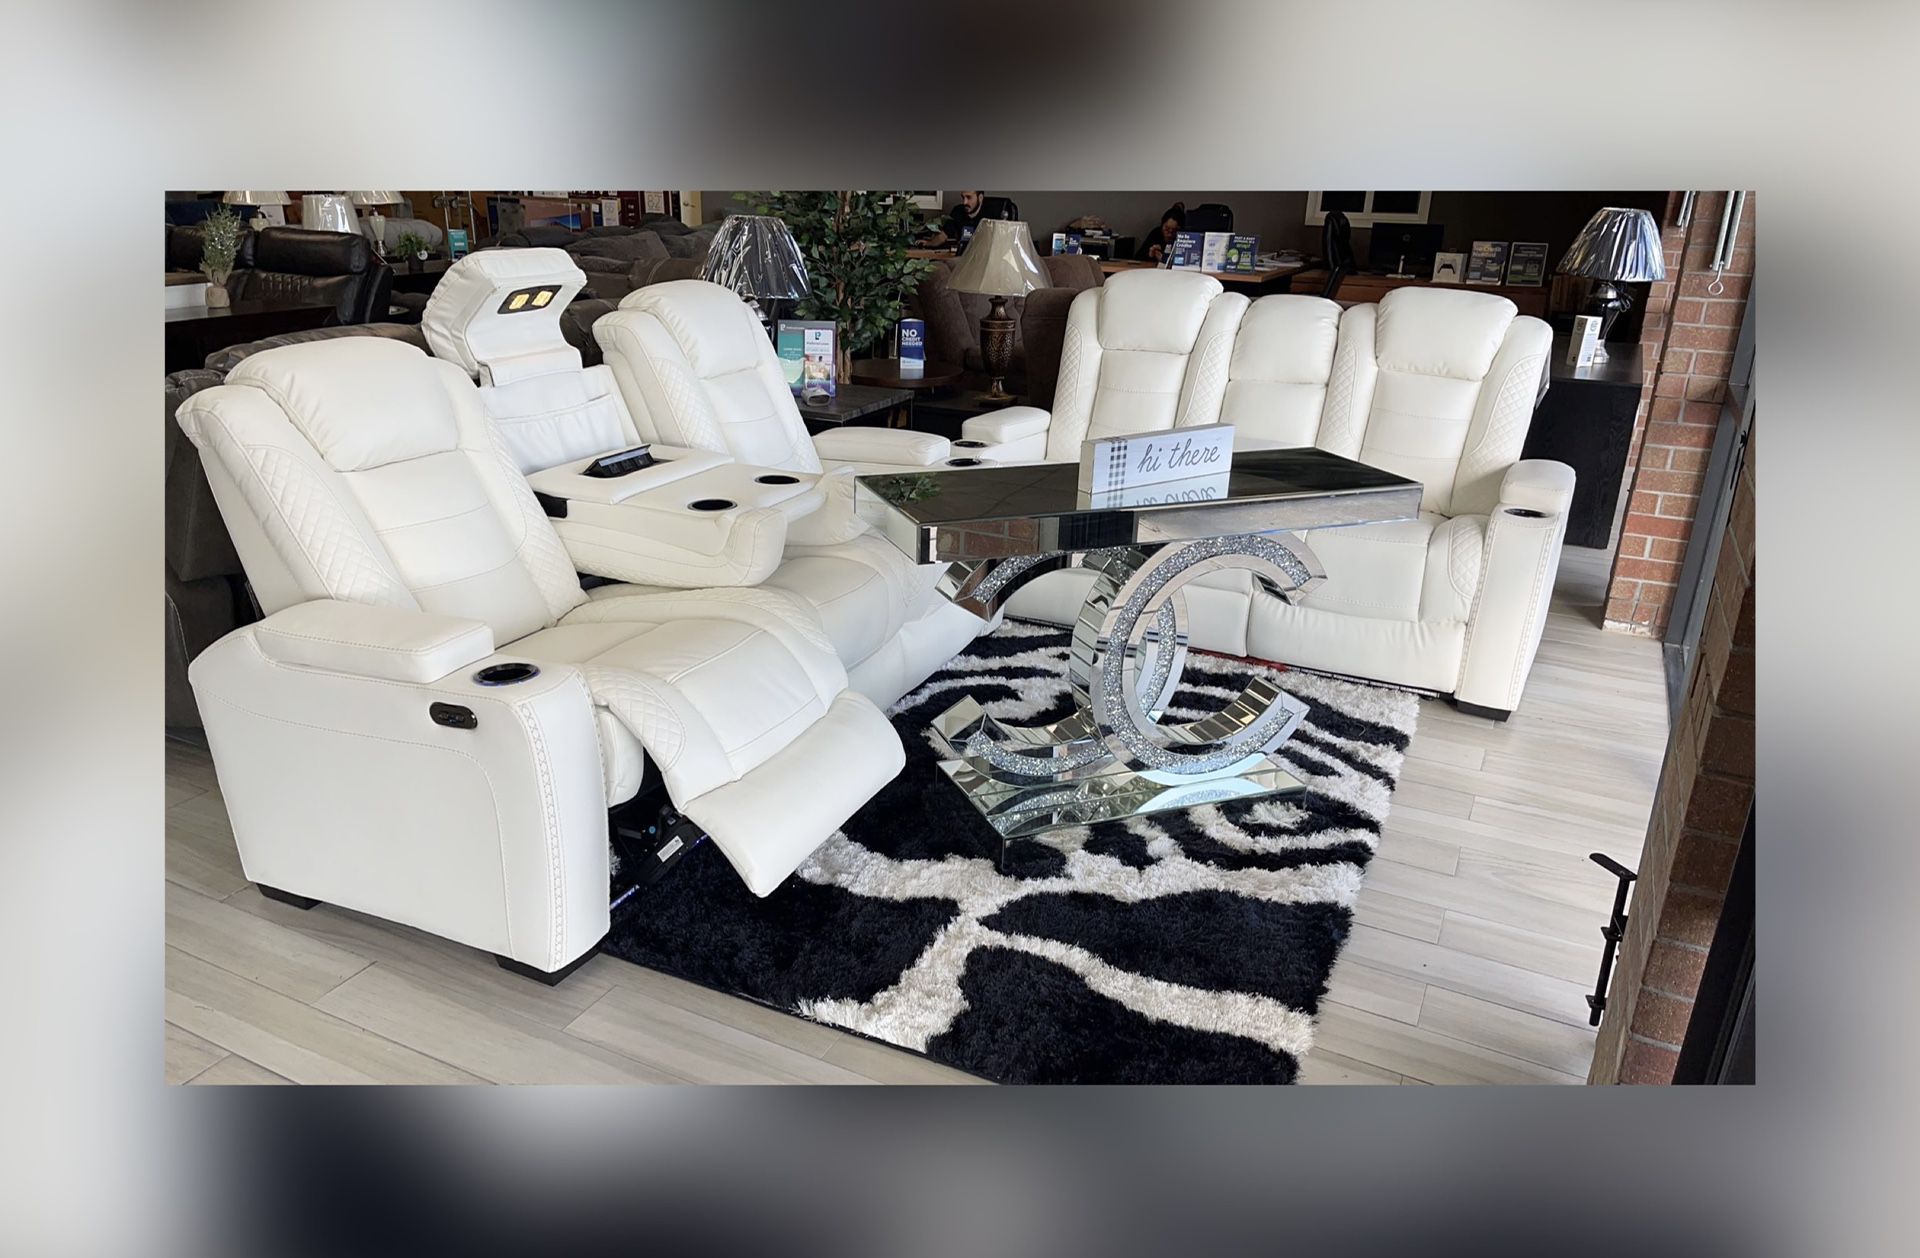 Ashley Party Time Power Recliner Sofa&Loveseat Set 🔥 Finance available! Fastest delivery process 🚚